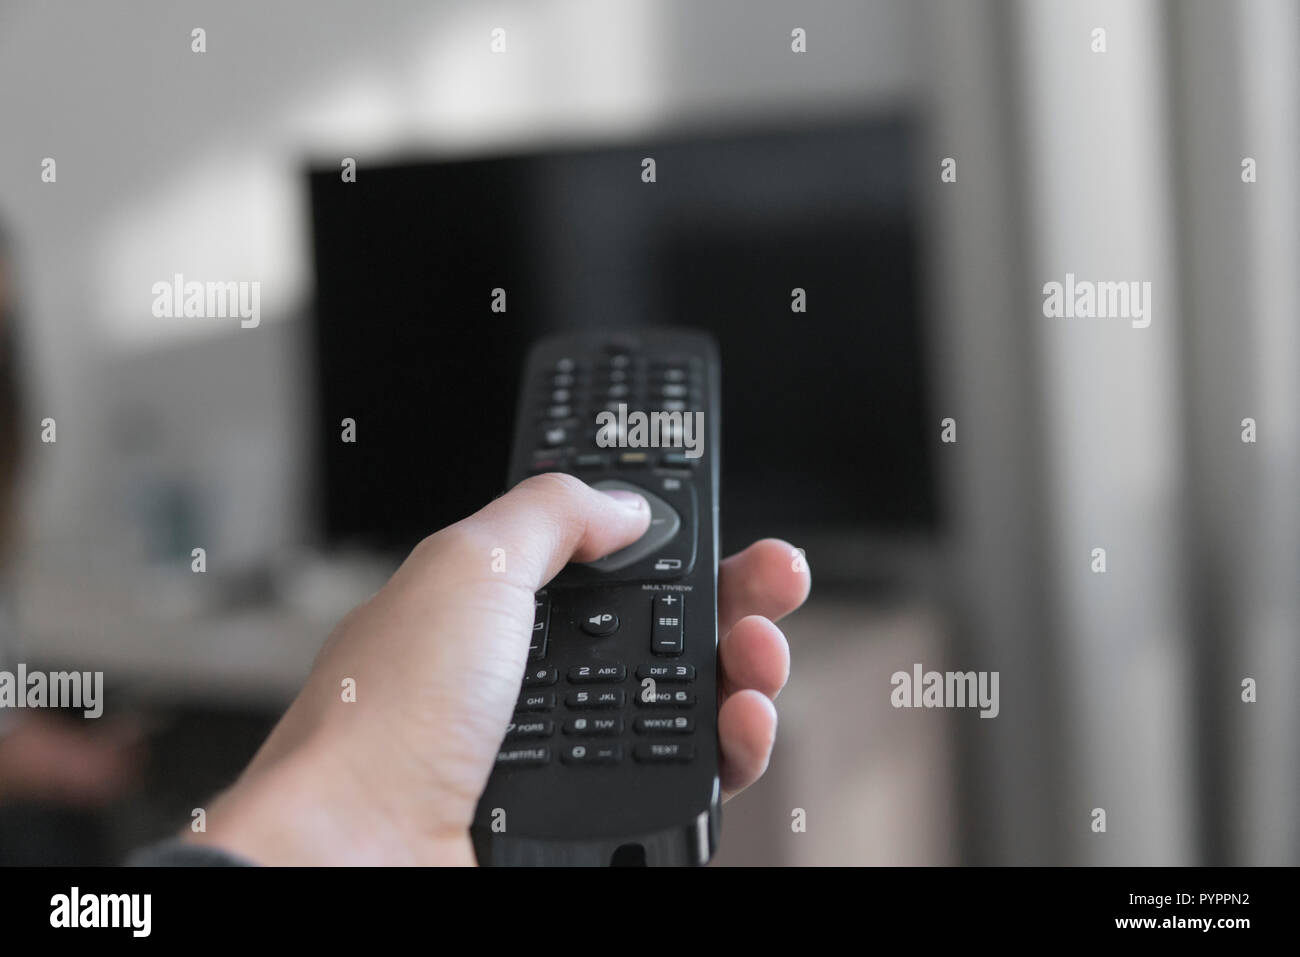 Hand holding remote control with television background in a living room. Stock Photo